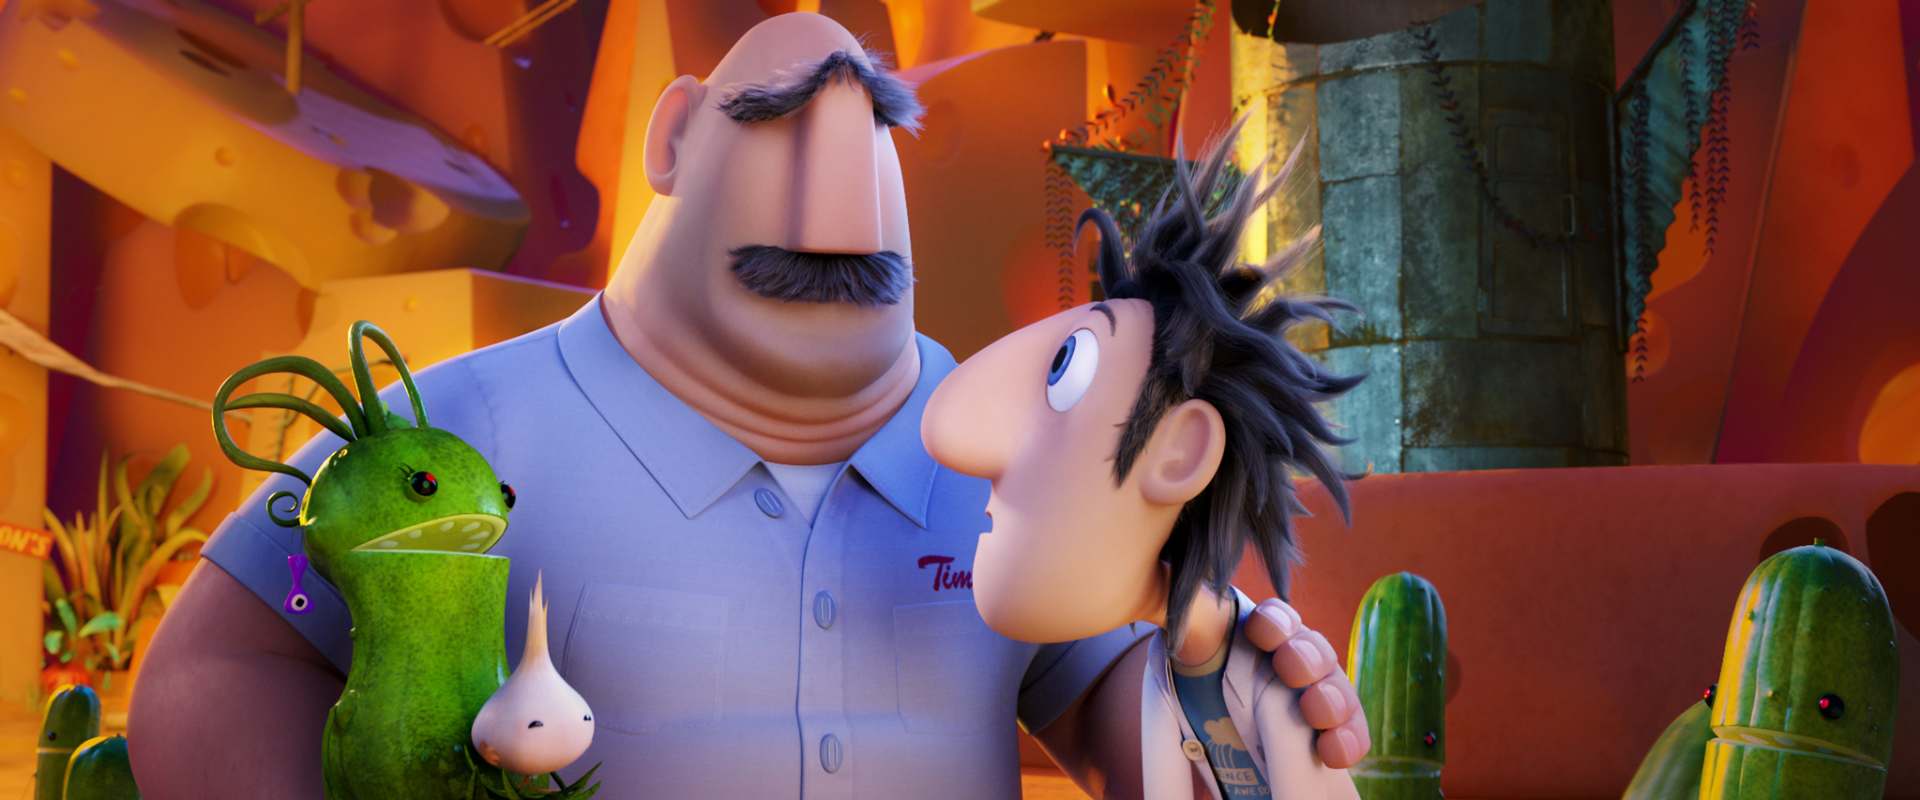 Cloudy with a Chance of Meatballs 2 background 2